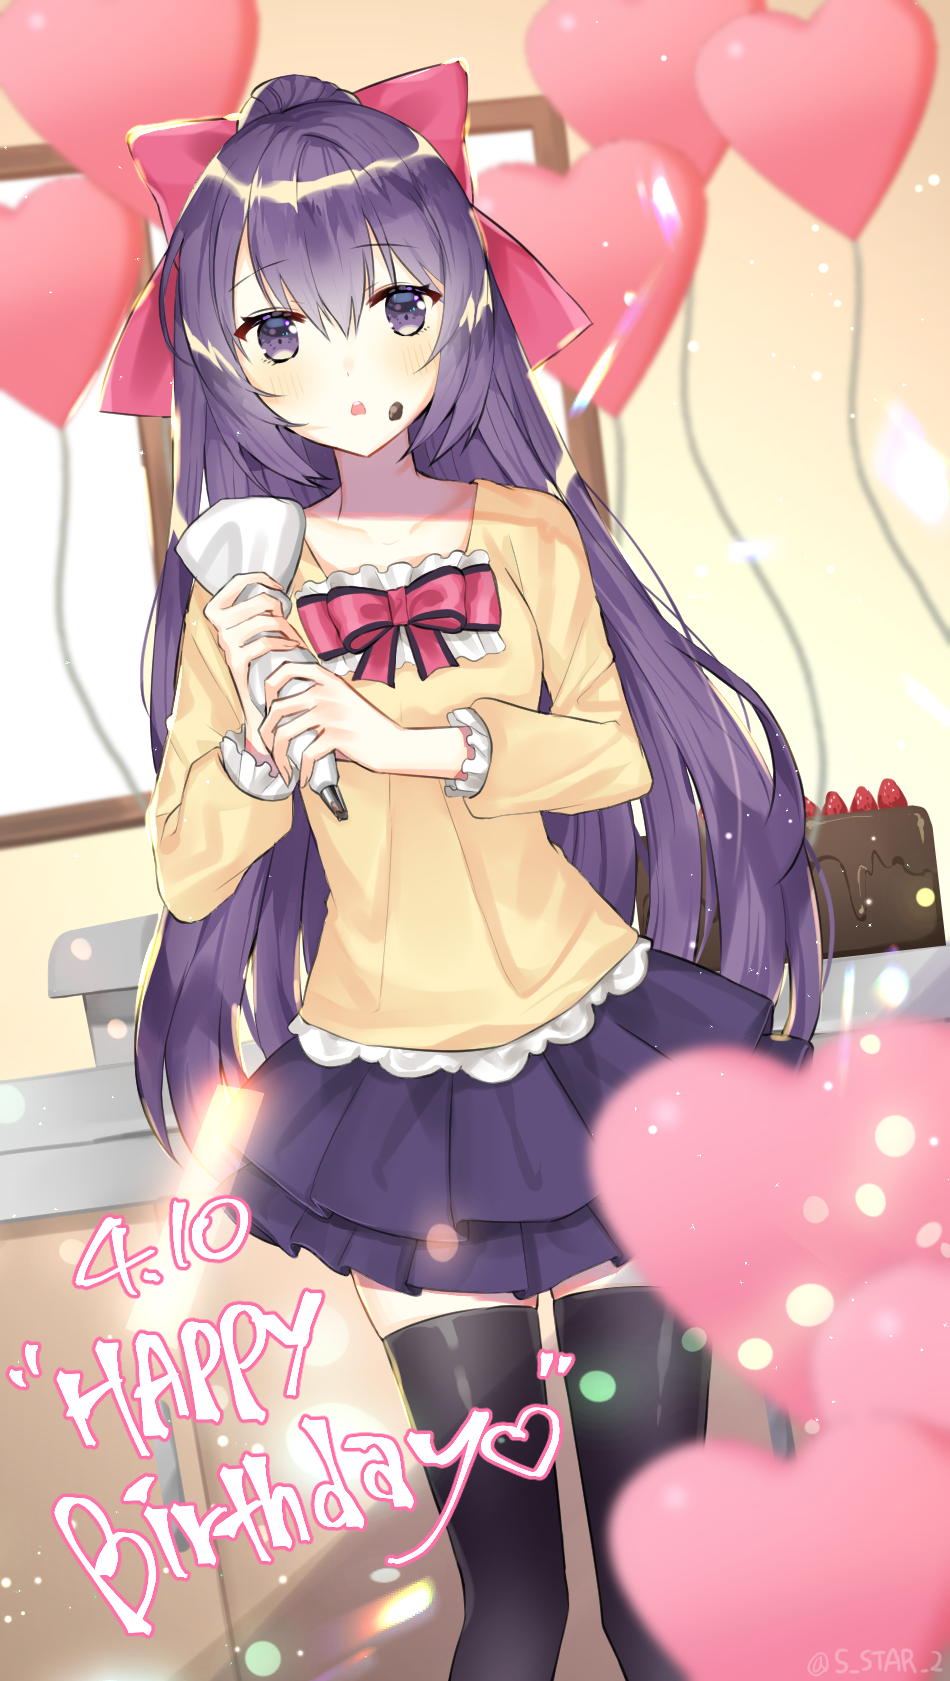 1girl bangs black_legwear bow cake chocolate_cake chocolate_icing date_a_live dated food food_on_face frilled_shirt frills fruit hair_between_eyes hair_bow happy_birthday heart heart_balloon highres holding icing knees_together_feet_apart long_hair long_sleeves open_mouth purple_hair purple_skirt red_bow shirt skirt solo standing strawberry thigh-highs user_uyfr2275 very_long_hair violet_eyes yatogami_tooka zettai_ryouiki